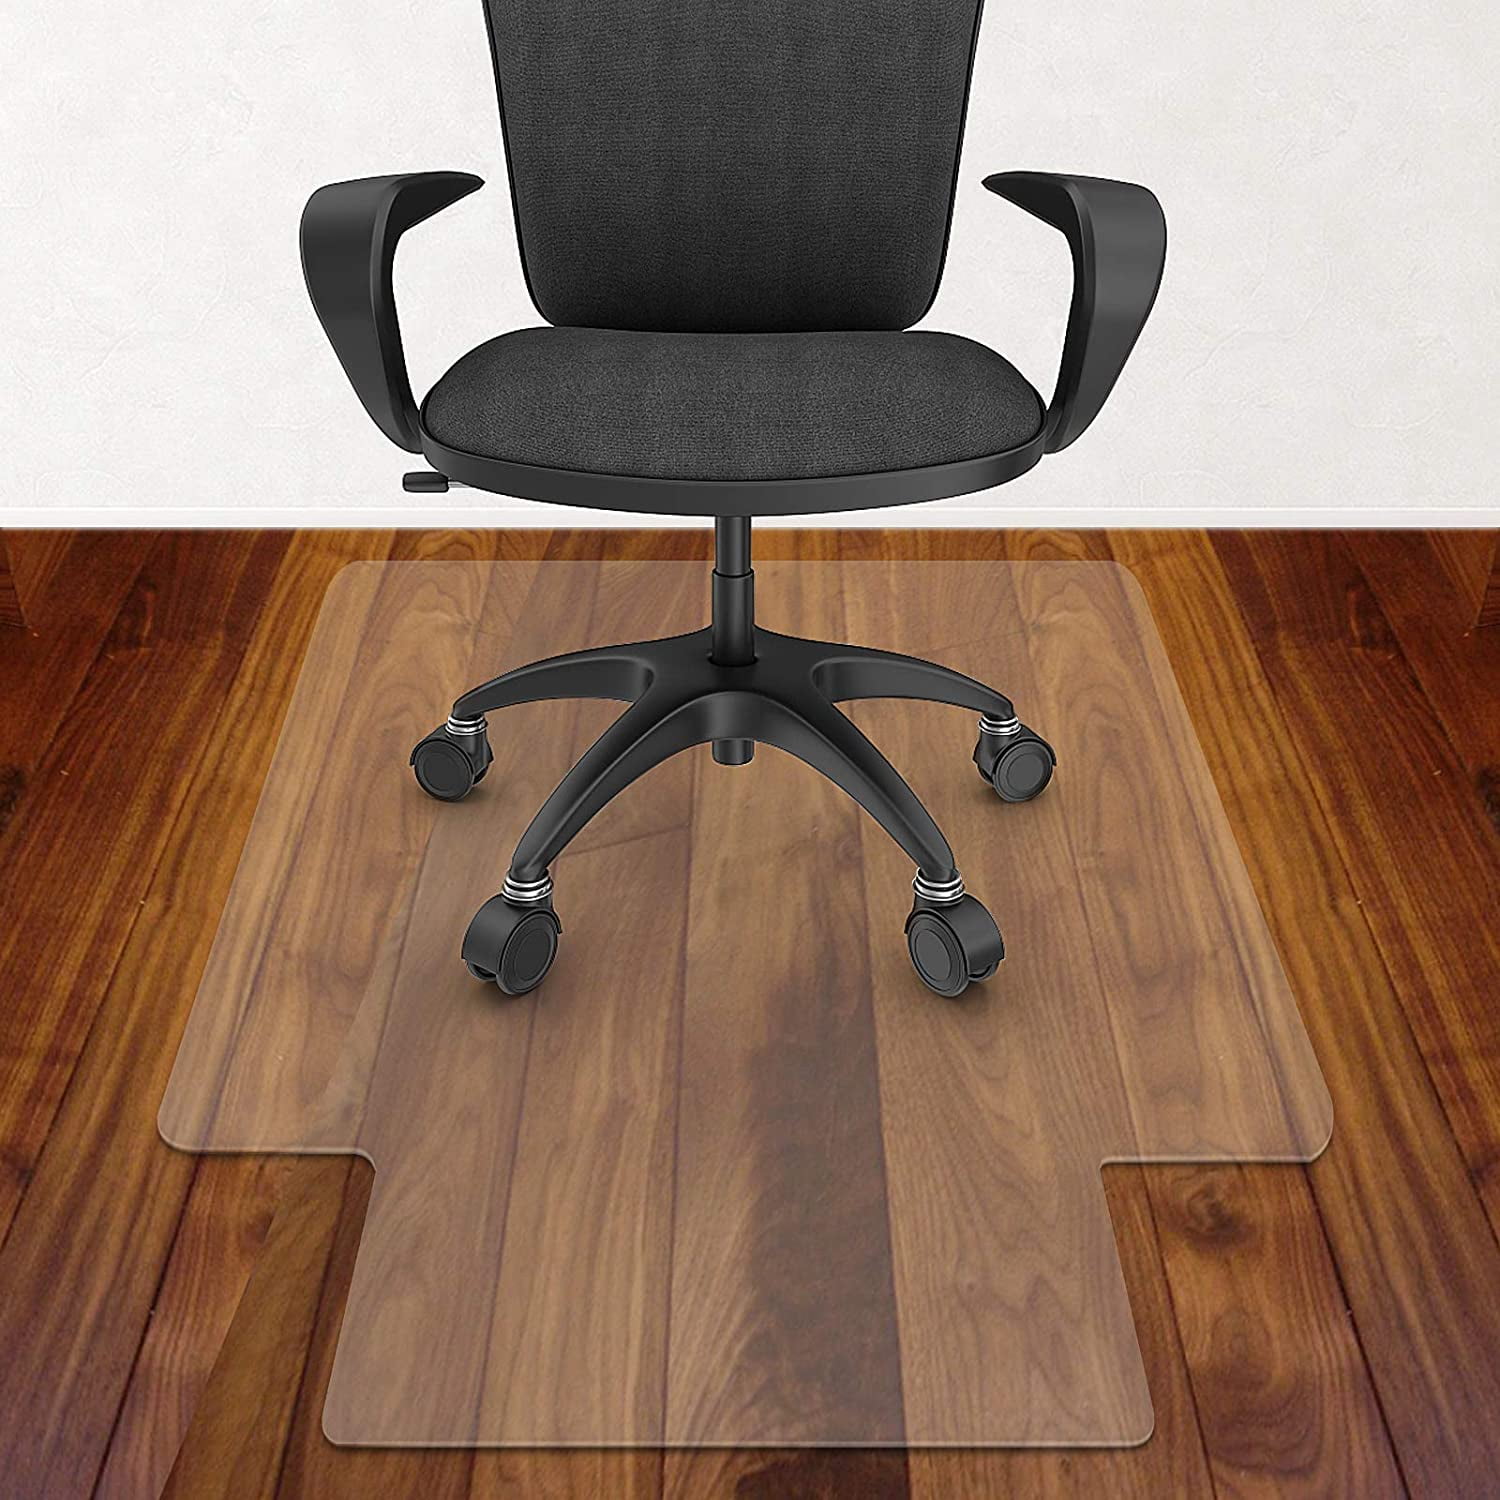 48" x 36" PVC Floor Mat Protector for Hard Wood Home Office Desk Rolling Chair 